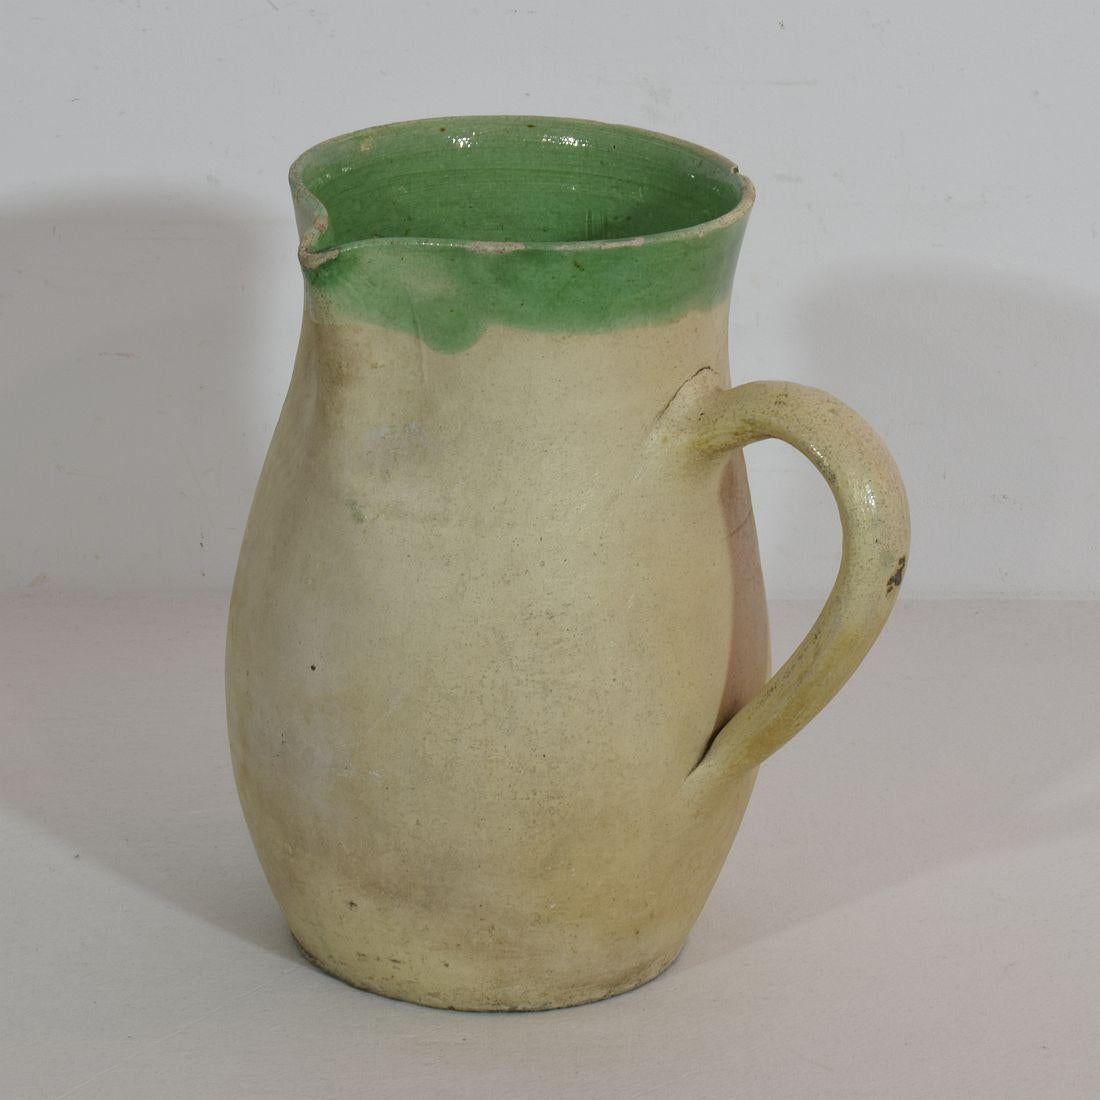 Great authentic and rare piece of pottery from the Provence. Beautiful weathered and an amazing color. Imperfections help authenticate this water cruche as it was an utilitarian type piece. France, circa 1850-1900.